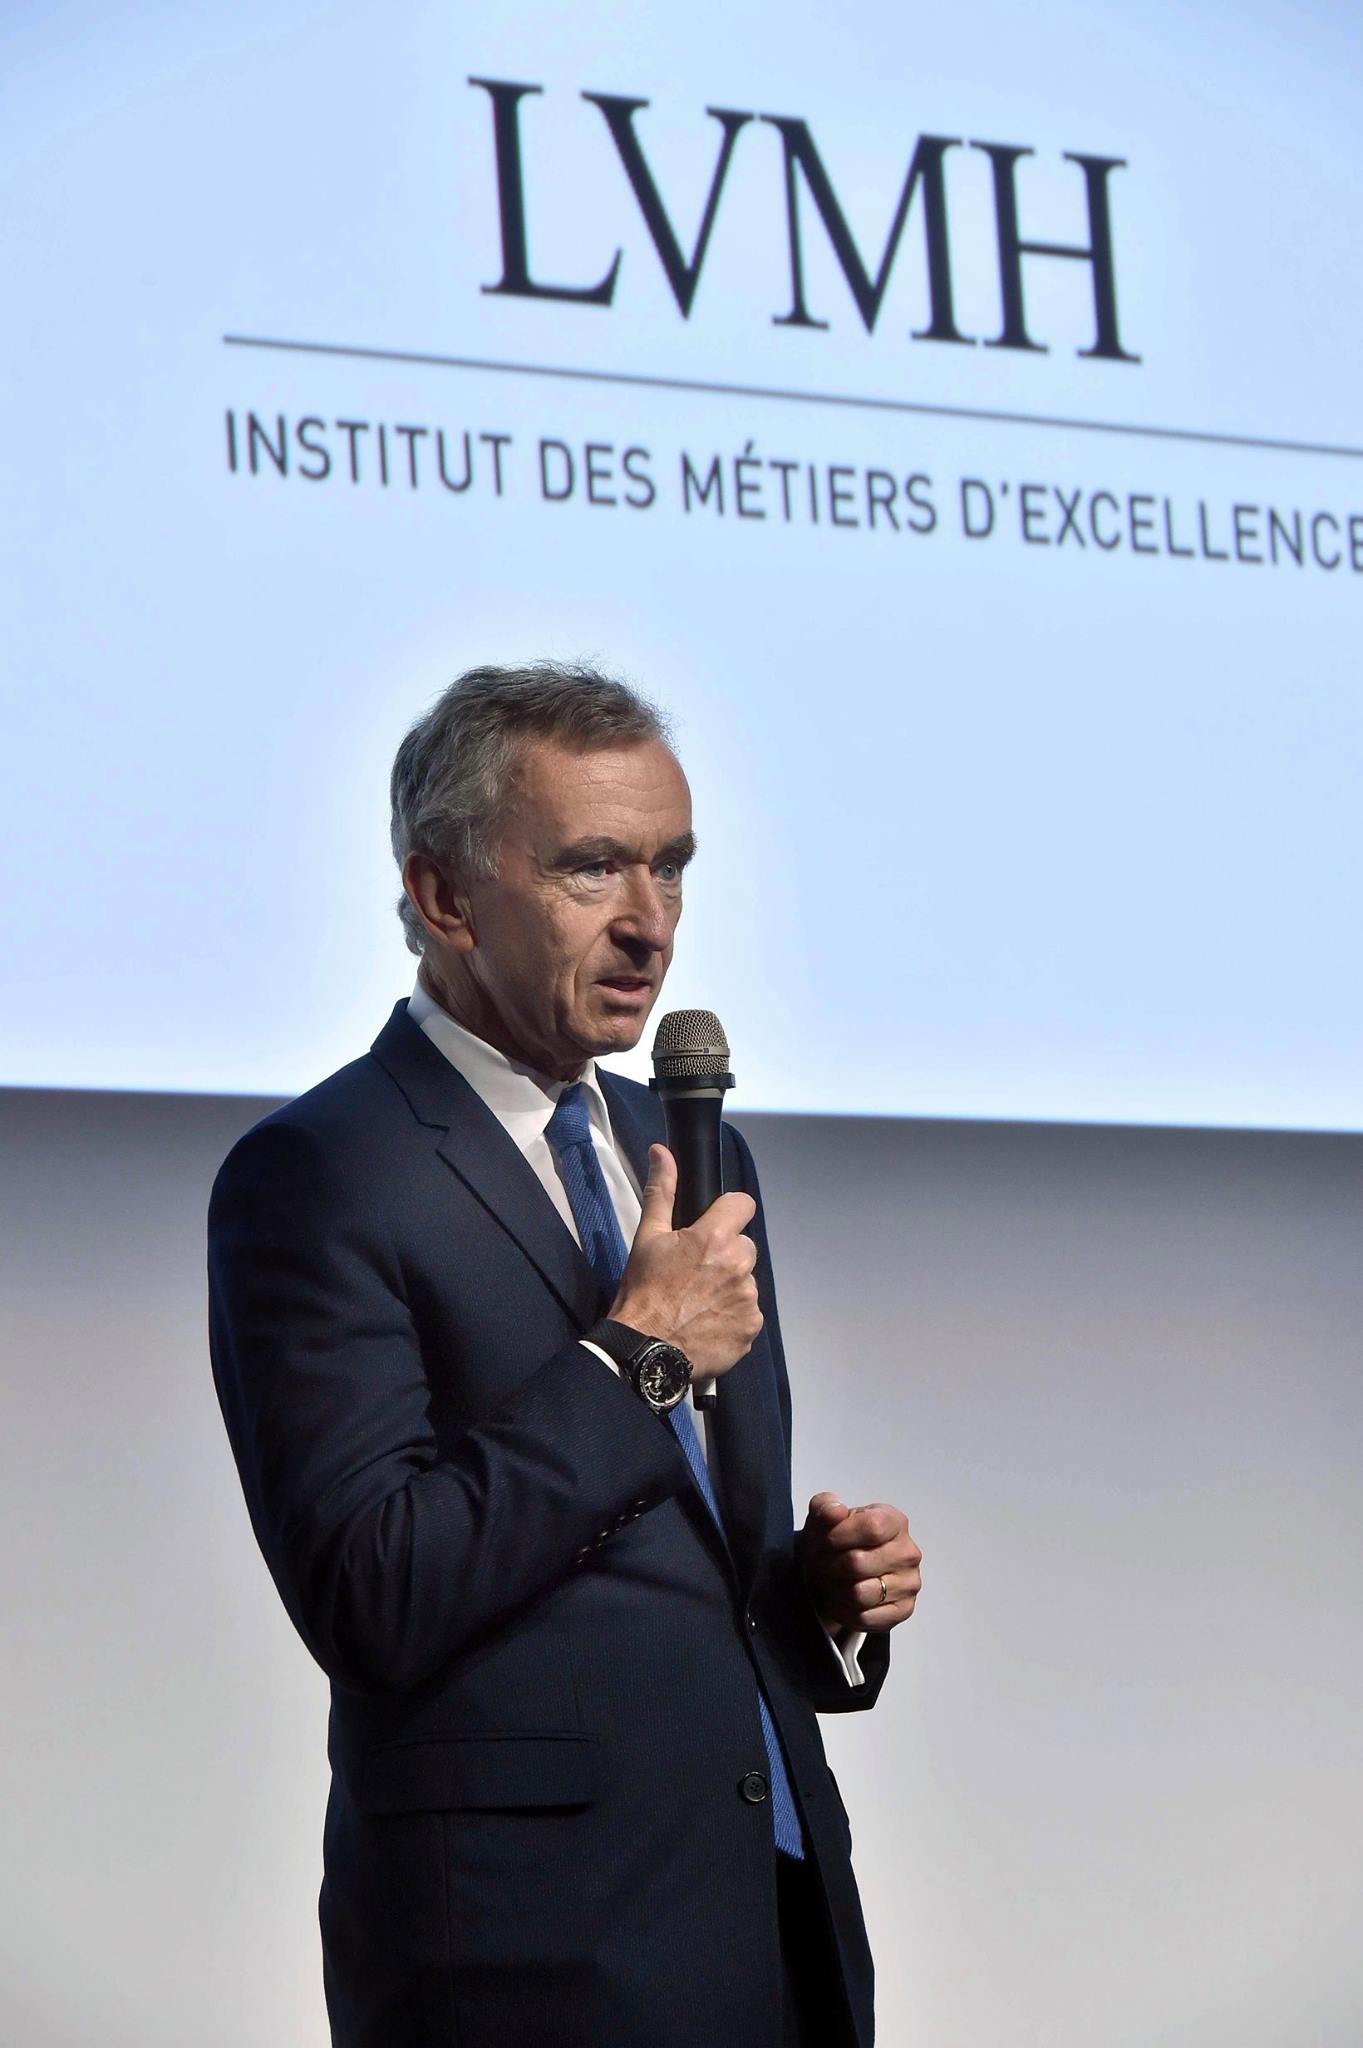 Bernard Arnault Facts - 10 Things to Know About Bernard Arnault, the  Richest Man in Fashion